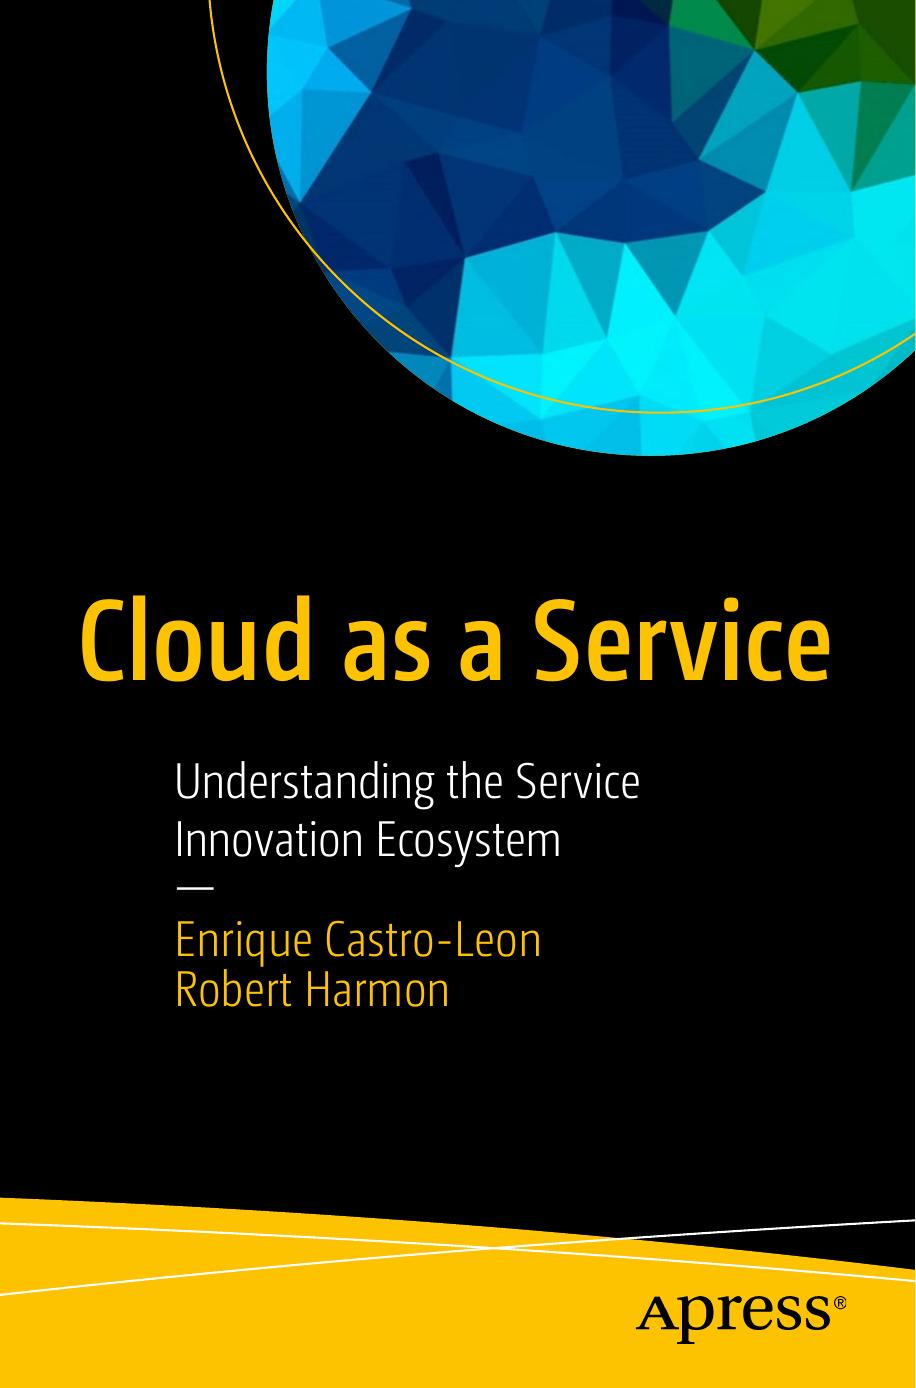 Cloud as a Service: Understanding the Service Innovation Ecosystem